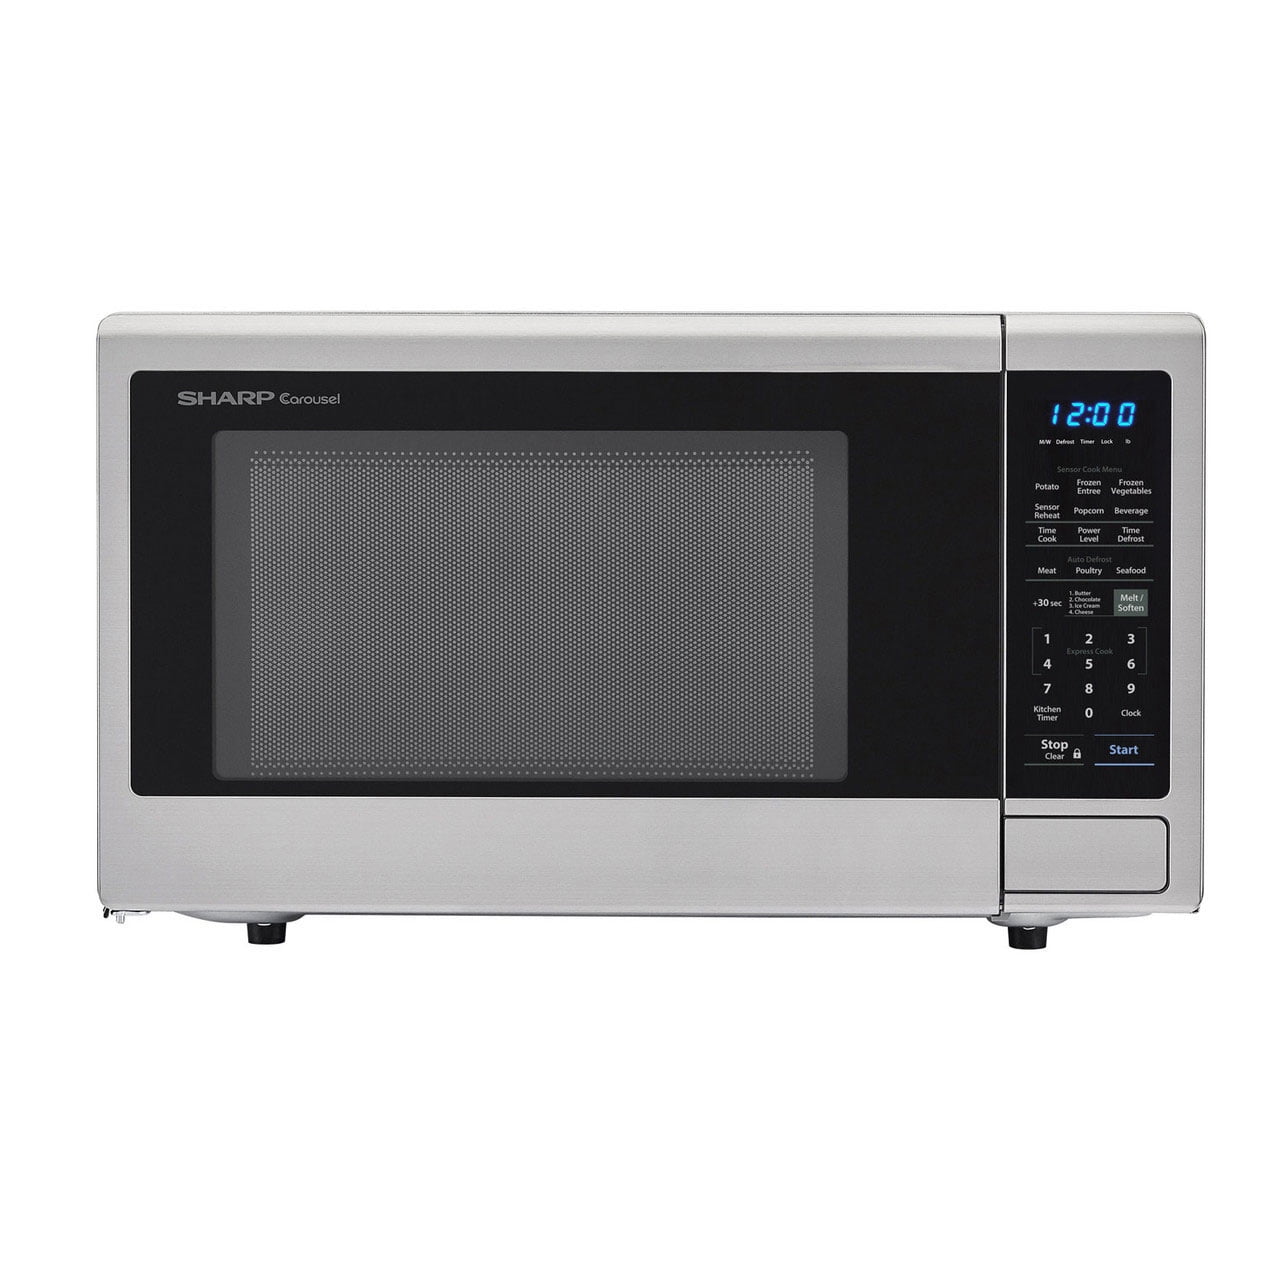 Magic Chef MCD1310ST 1000W 1.3 cu.ft Countertop Microwave Oven Stainless Steel 